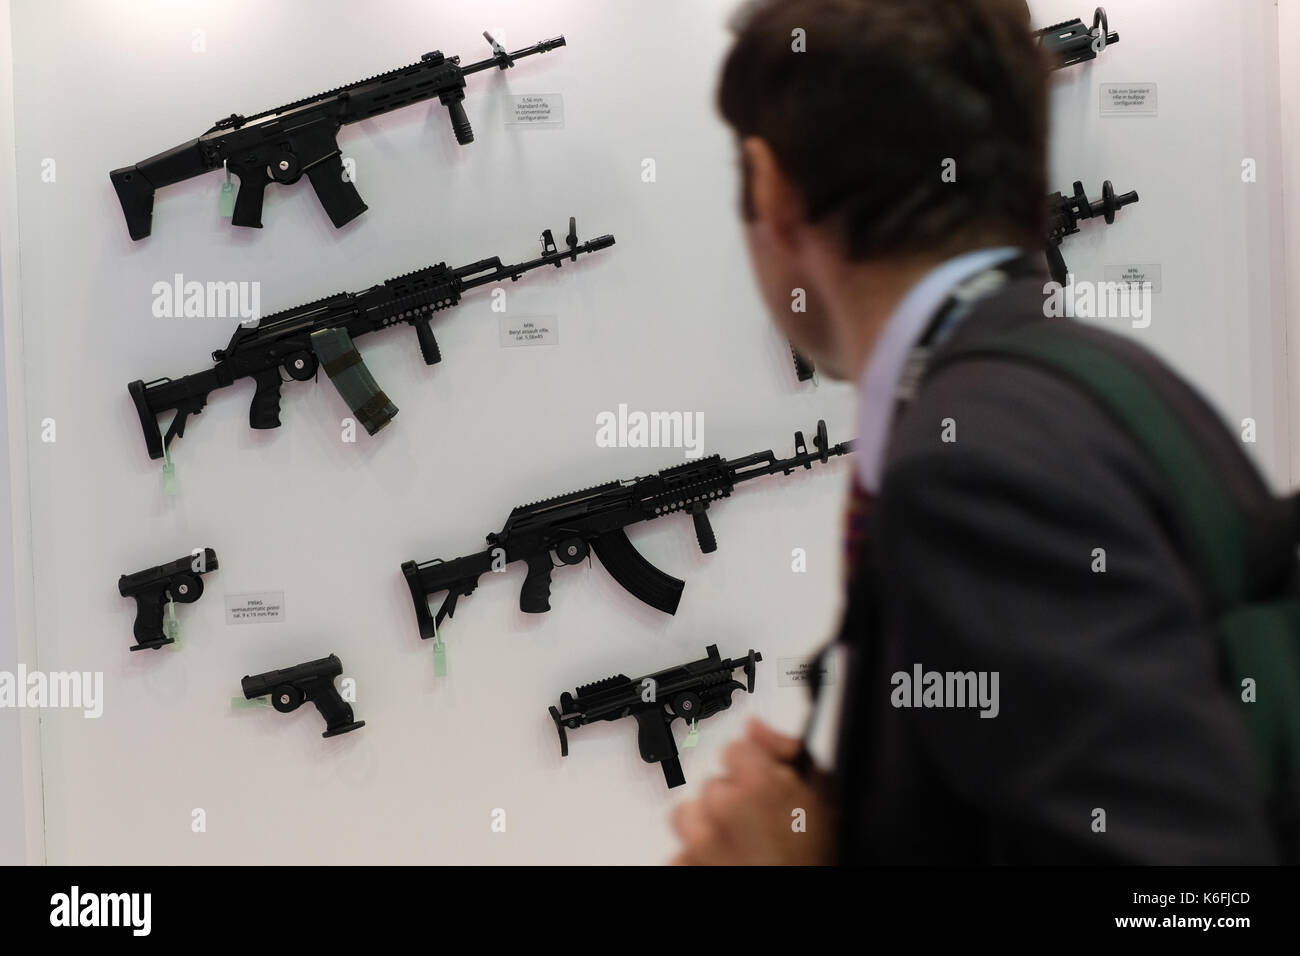 A visitor looks at weapons during the Defence Systems and Equipment International arms fair at the ExCel centre in London. Stock Photo